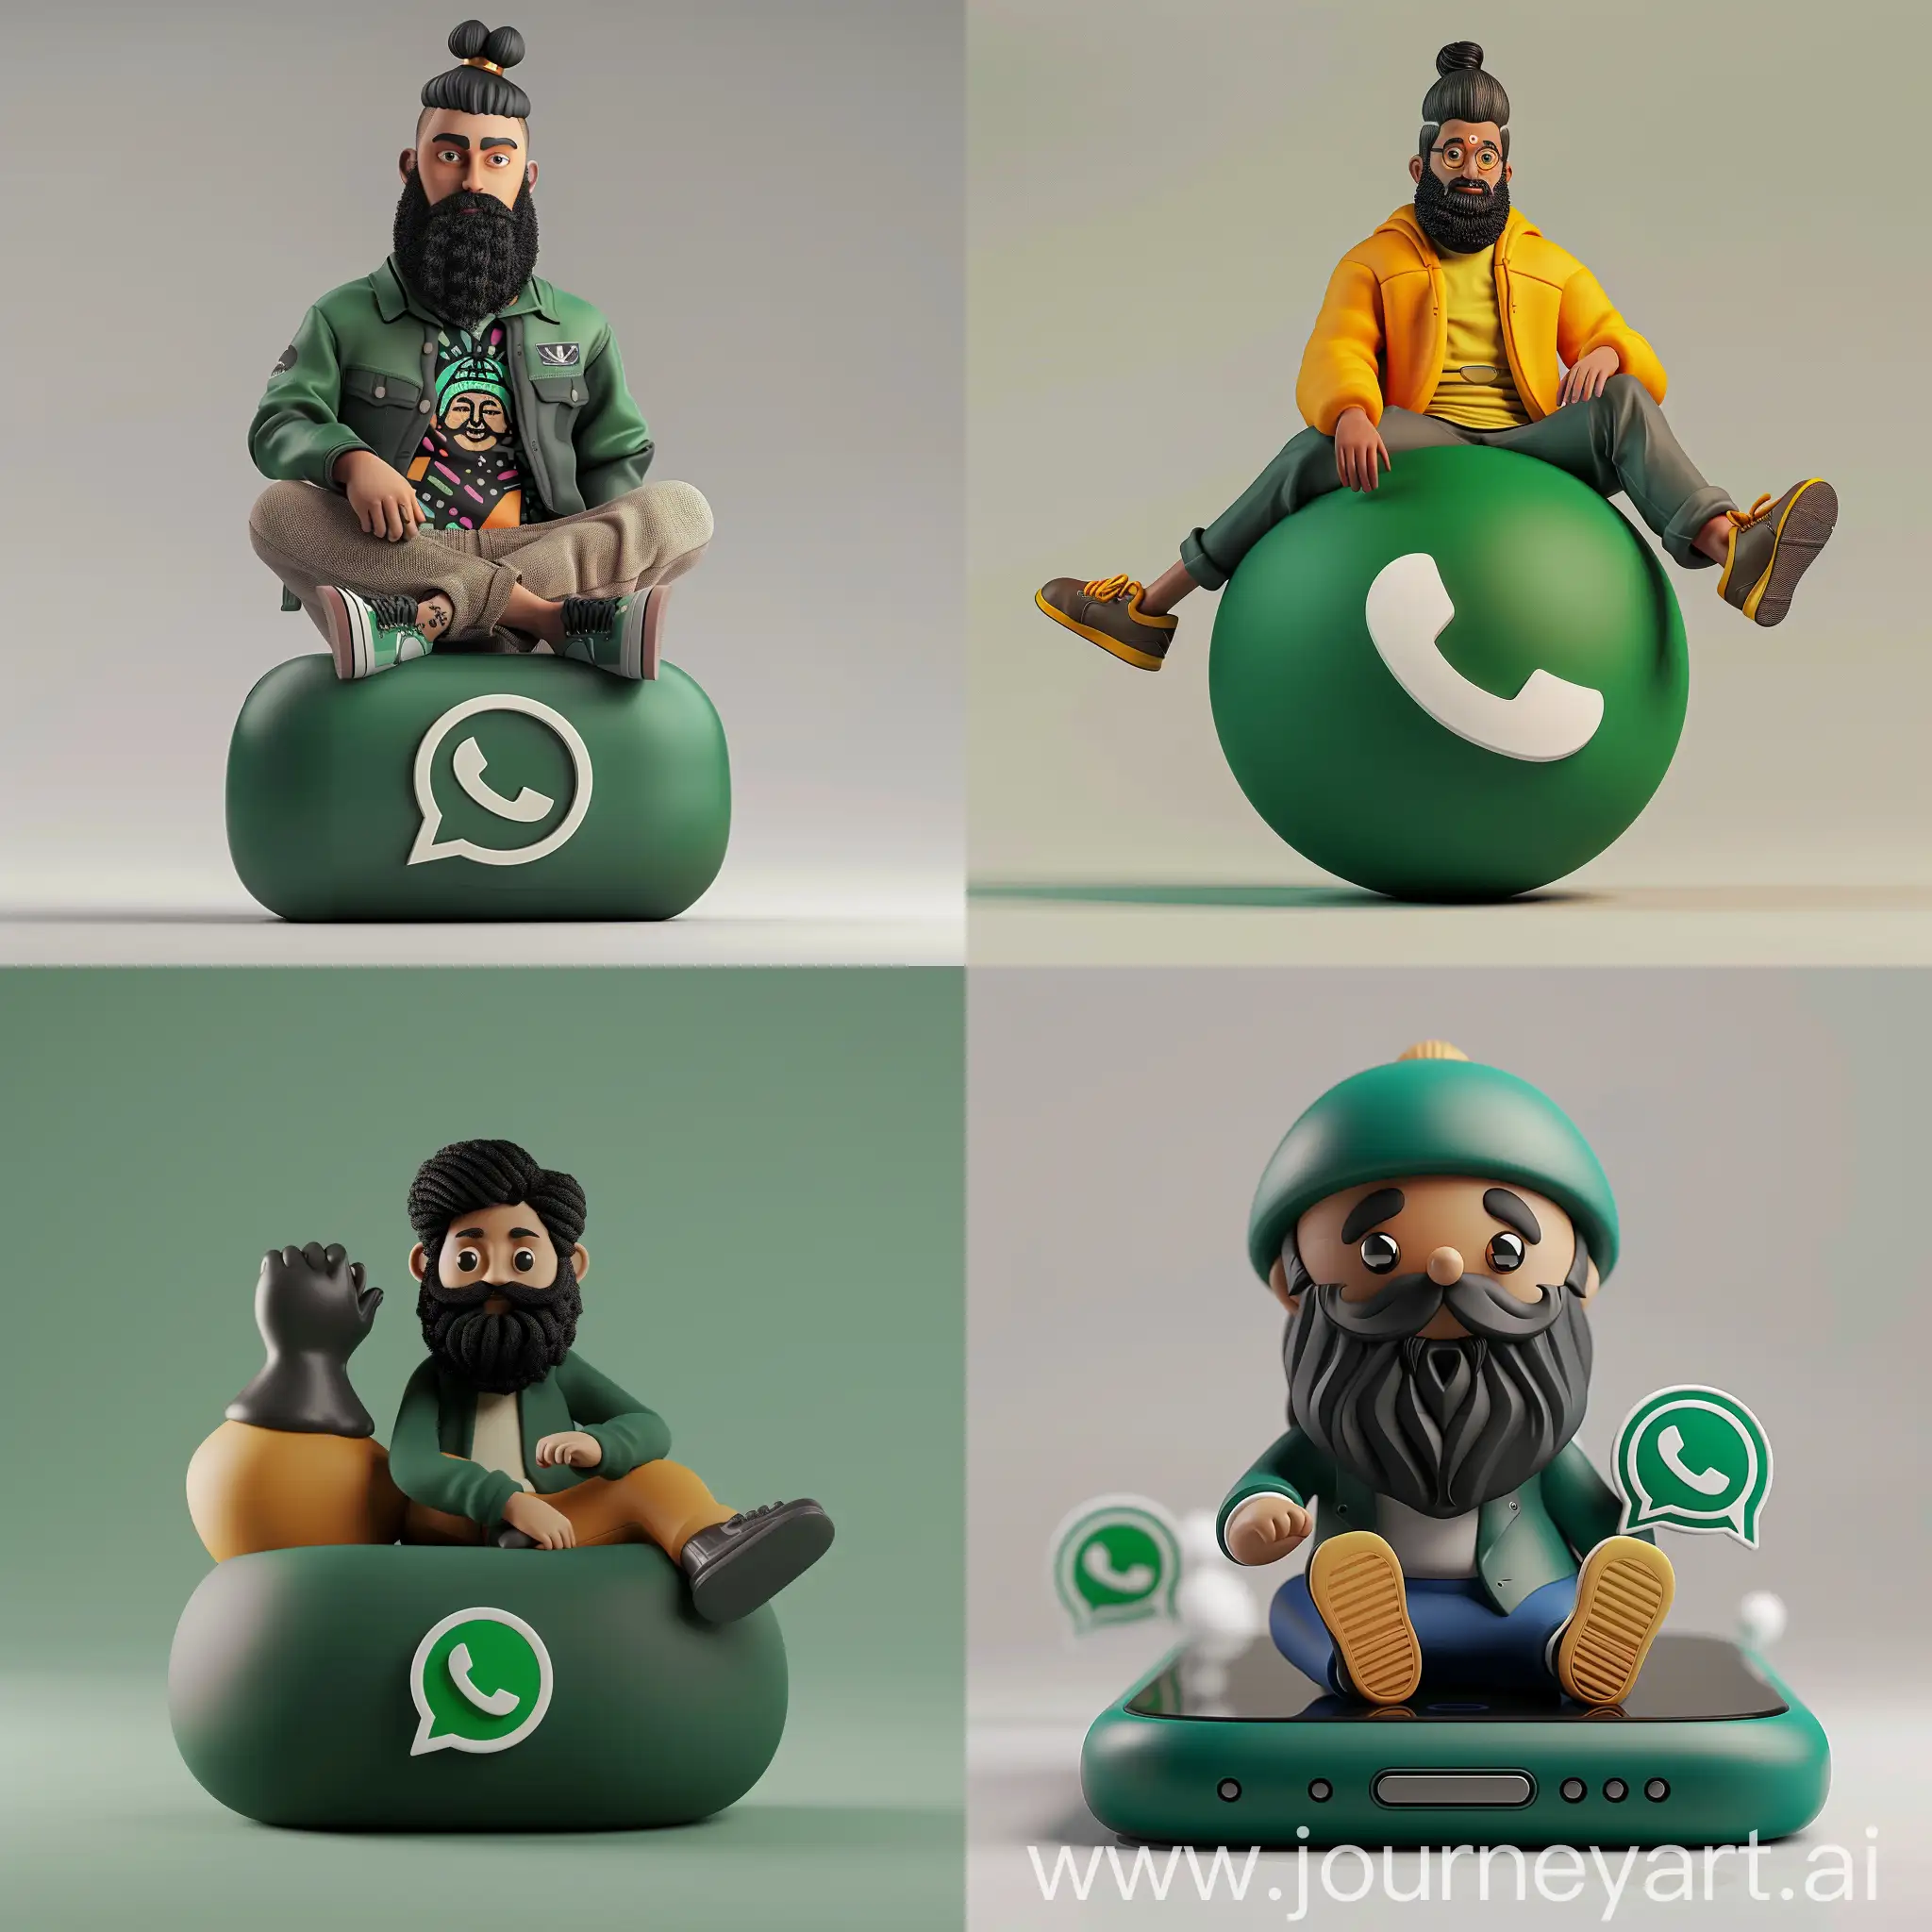 
Prompt:

Prompt: "Create a 3D illustration of an animated character of a black beard man sitting casually on top of a social media logo "WhatsApp". The character must wear modern Indian clothes. The background of the character is mockup of his WhatsApp profile page with a profile name "Vithusan.S" and a profile picture same as character."